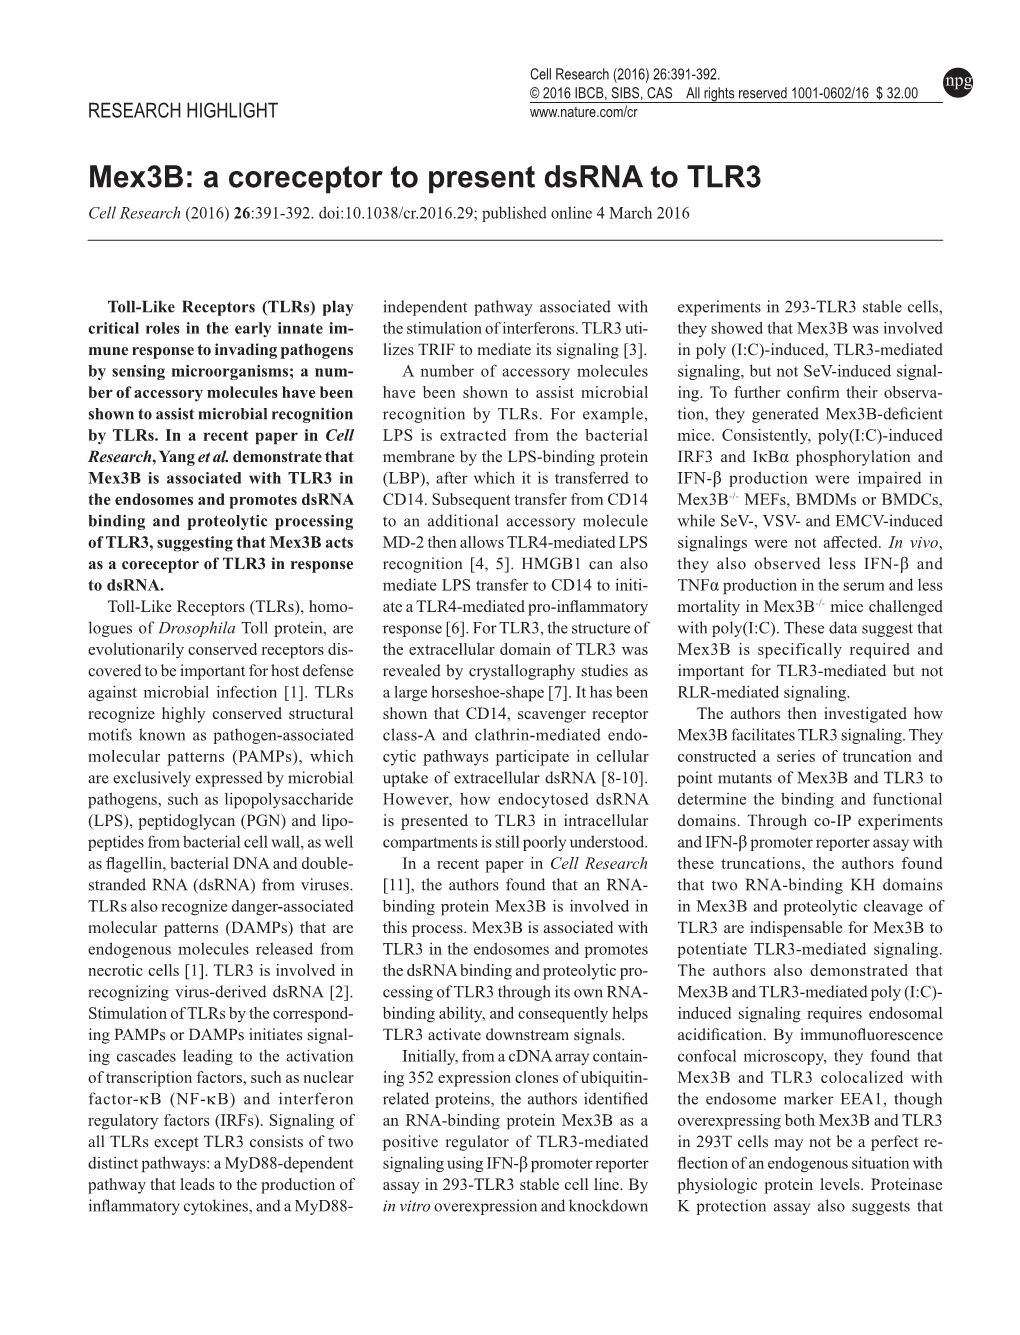 Mex3b, a Coreceptor to Present Dsrna to TLR3